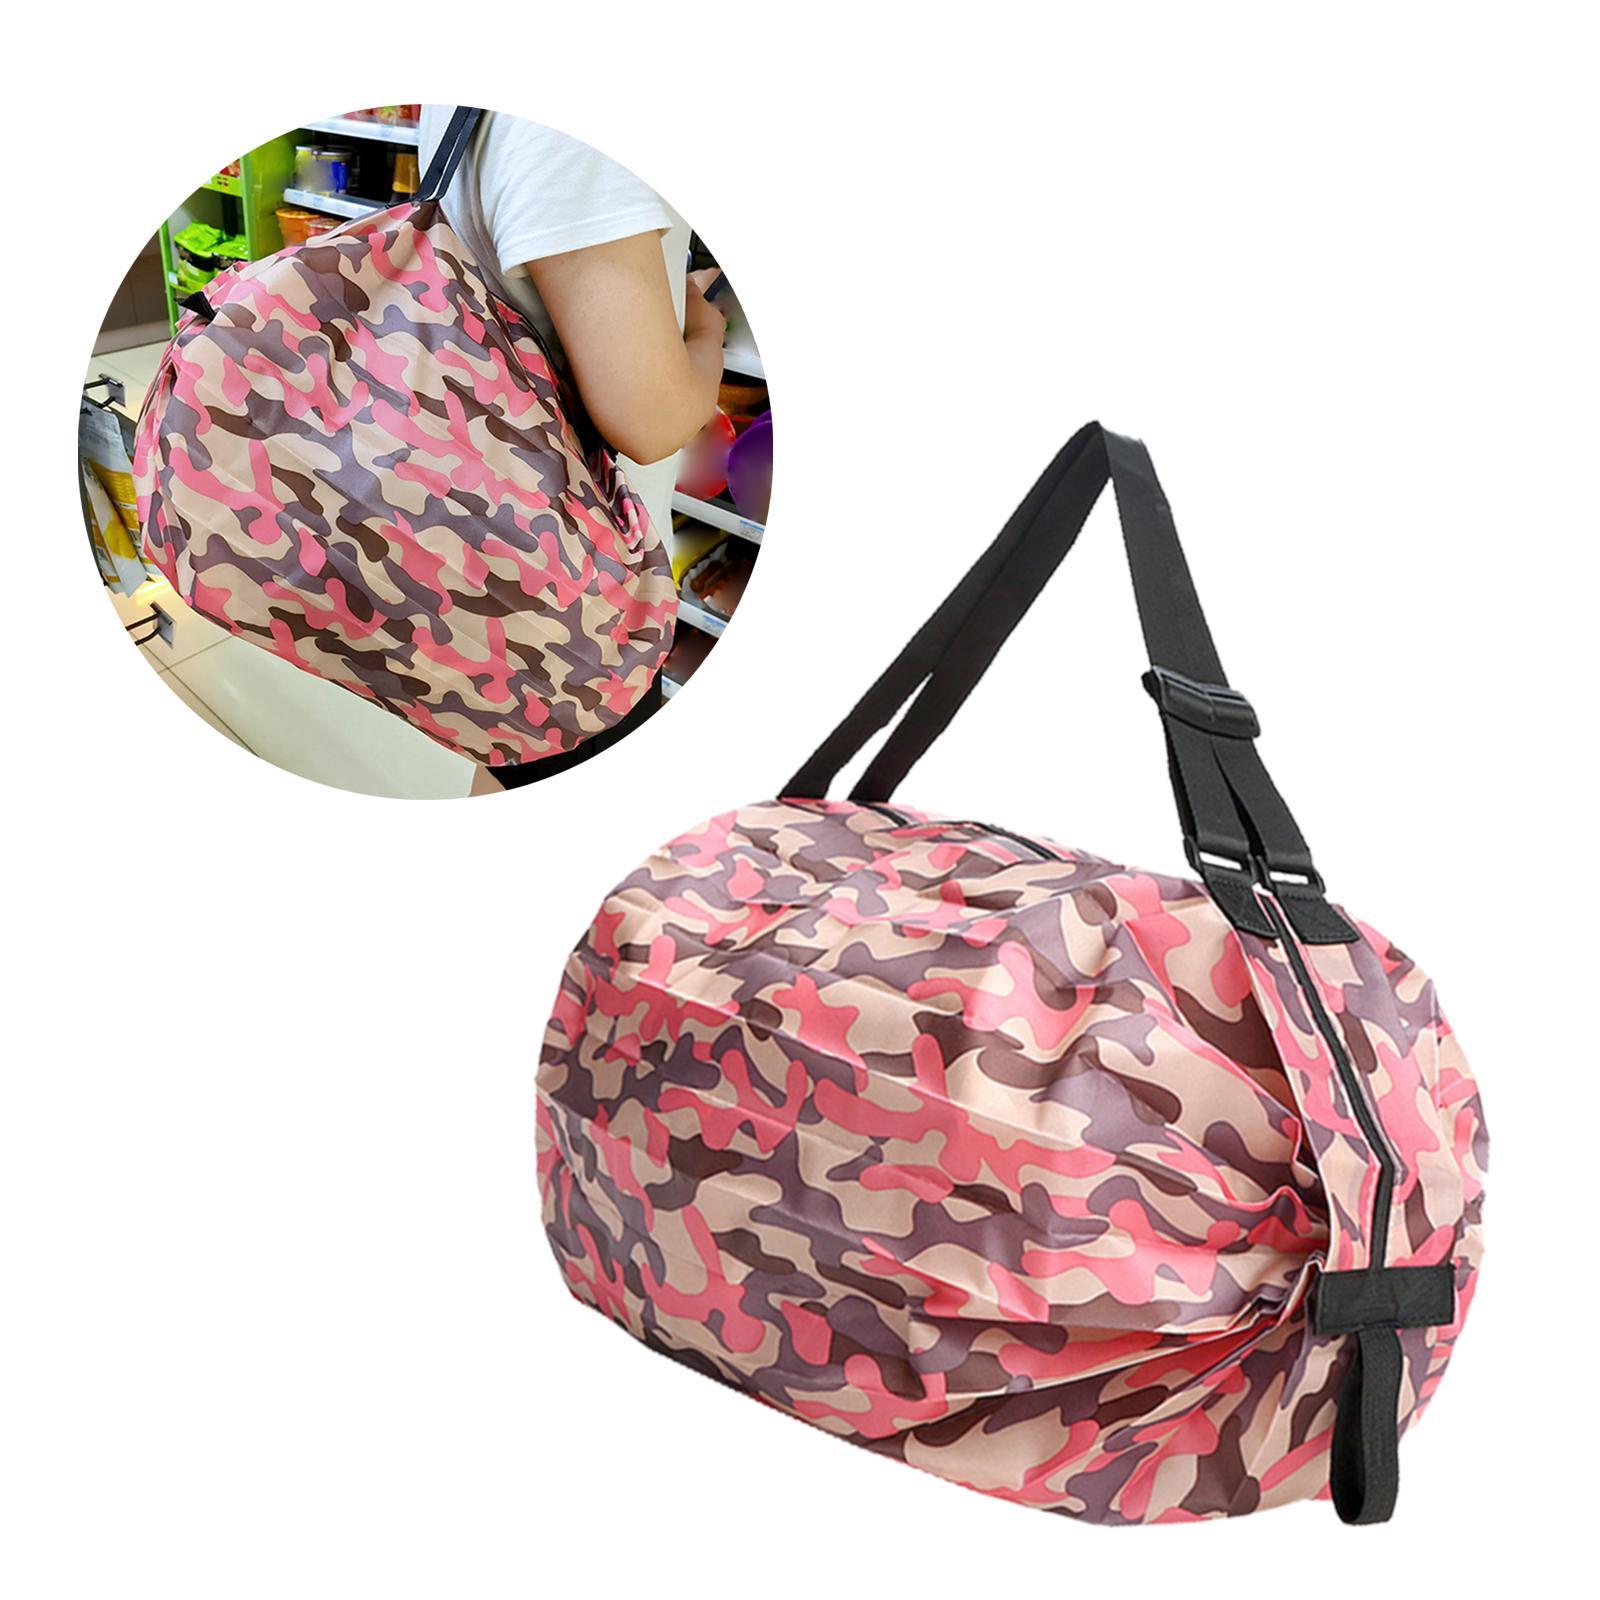 Shopping Bags Waterproof Foldable Grocery Bag Tote Portable Washable Convenient Outdoor Travel Storage Bag for Groceries Sports Beach Womens